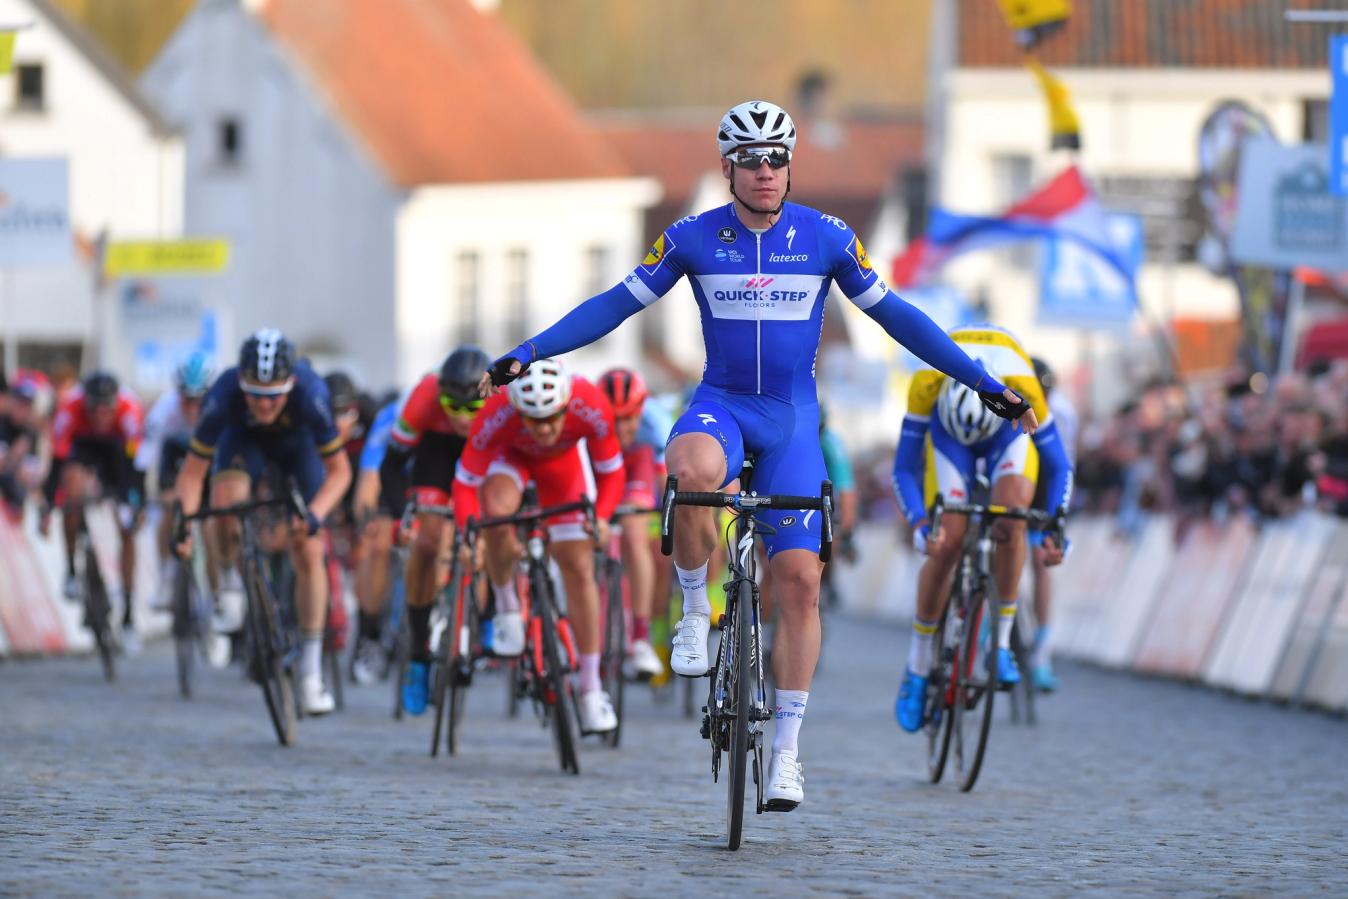 Fabio Jakobsen’s first victory for Quick-Step Floors came in the 2018 Danilith Nokere Koerse